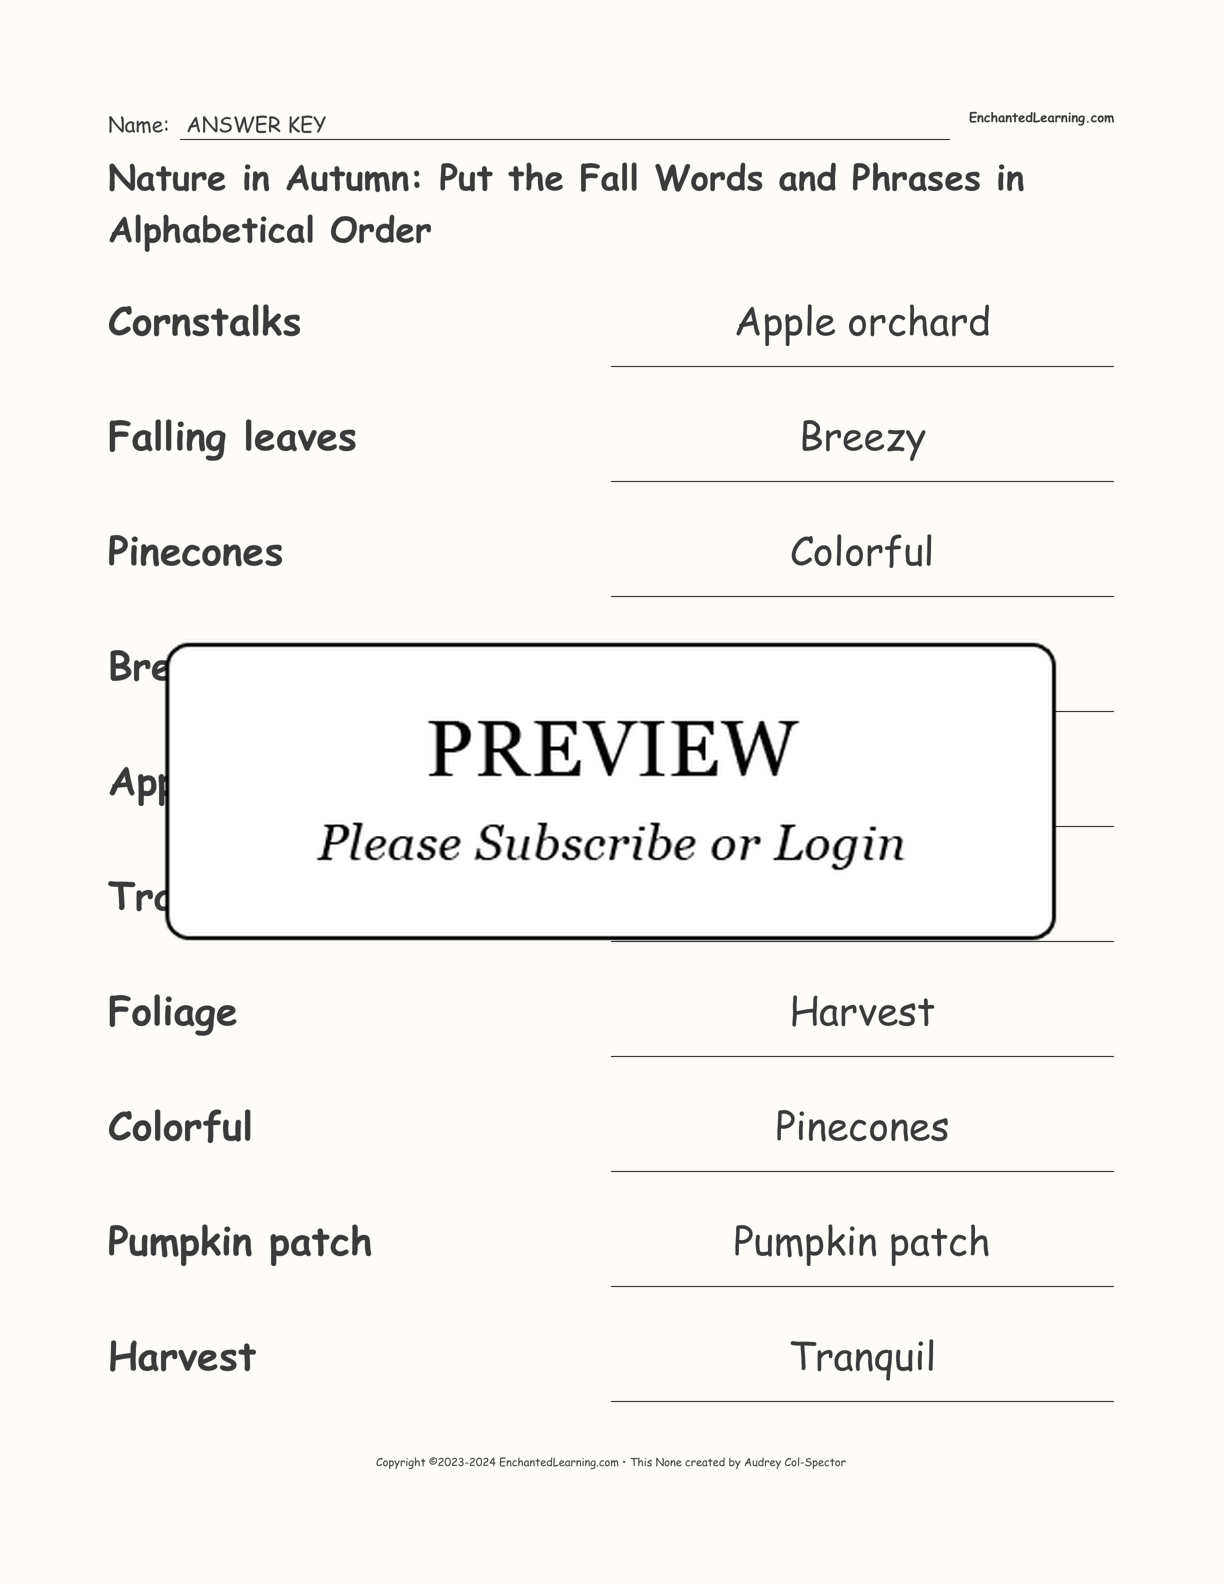 Nature in Autumn: Put the Fall Words and Phrases in Alphabetical Order interactive worksheet page 2